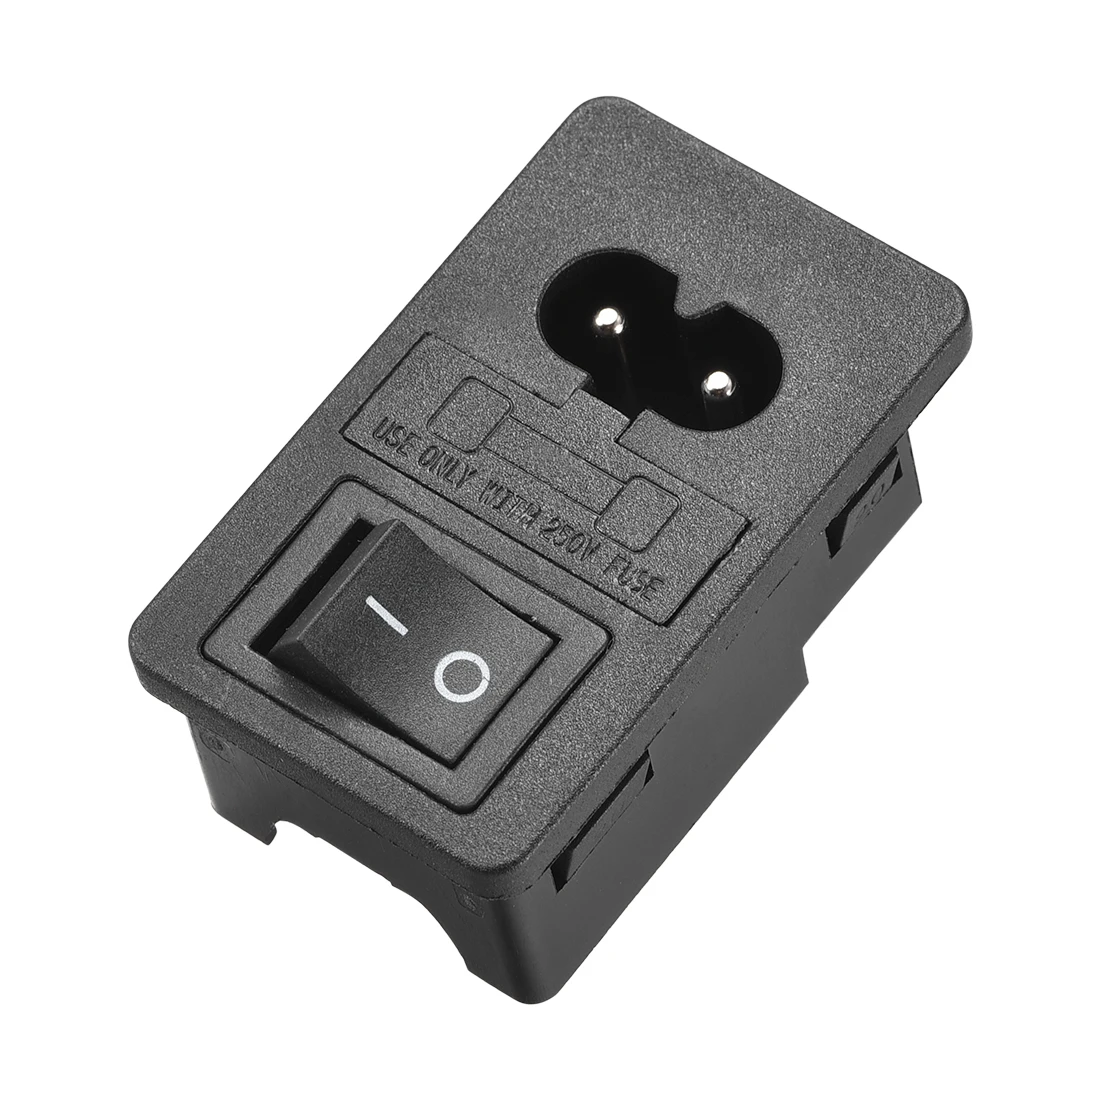 Uxcell C8-8 Panel Mount Plug Adapter 250V 10A 2P 2mm Buckle IEC Inlet Plug Power Connector Socket 2P Fuse Switch